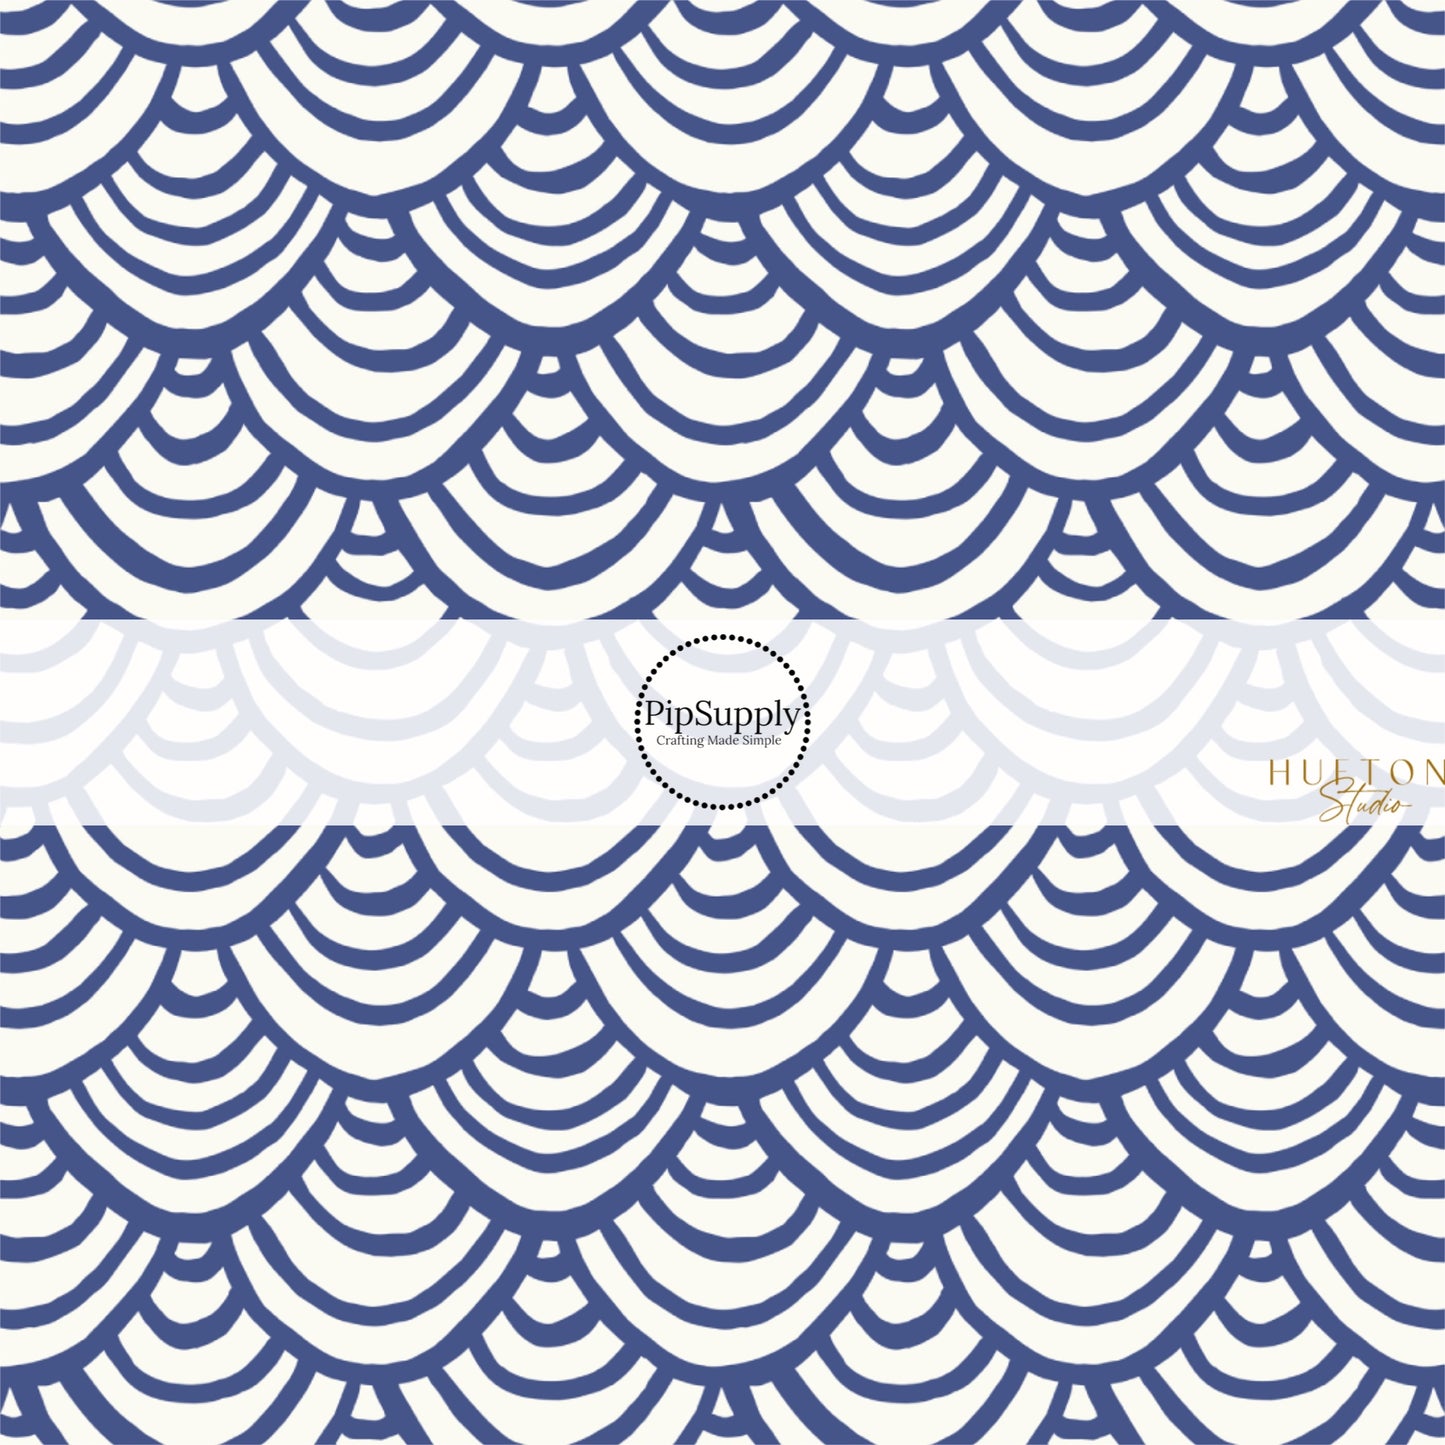 This summer fabric by the yard features blue and white scallop patterns. This fun themed fabric can be used for all your sewing and crafting needs!